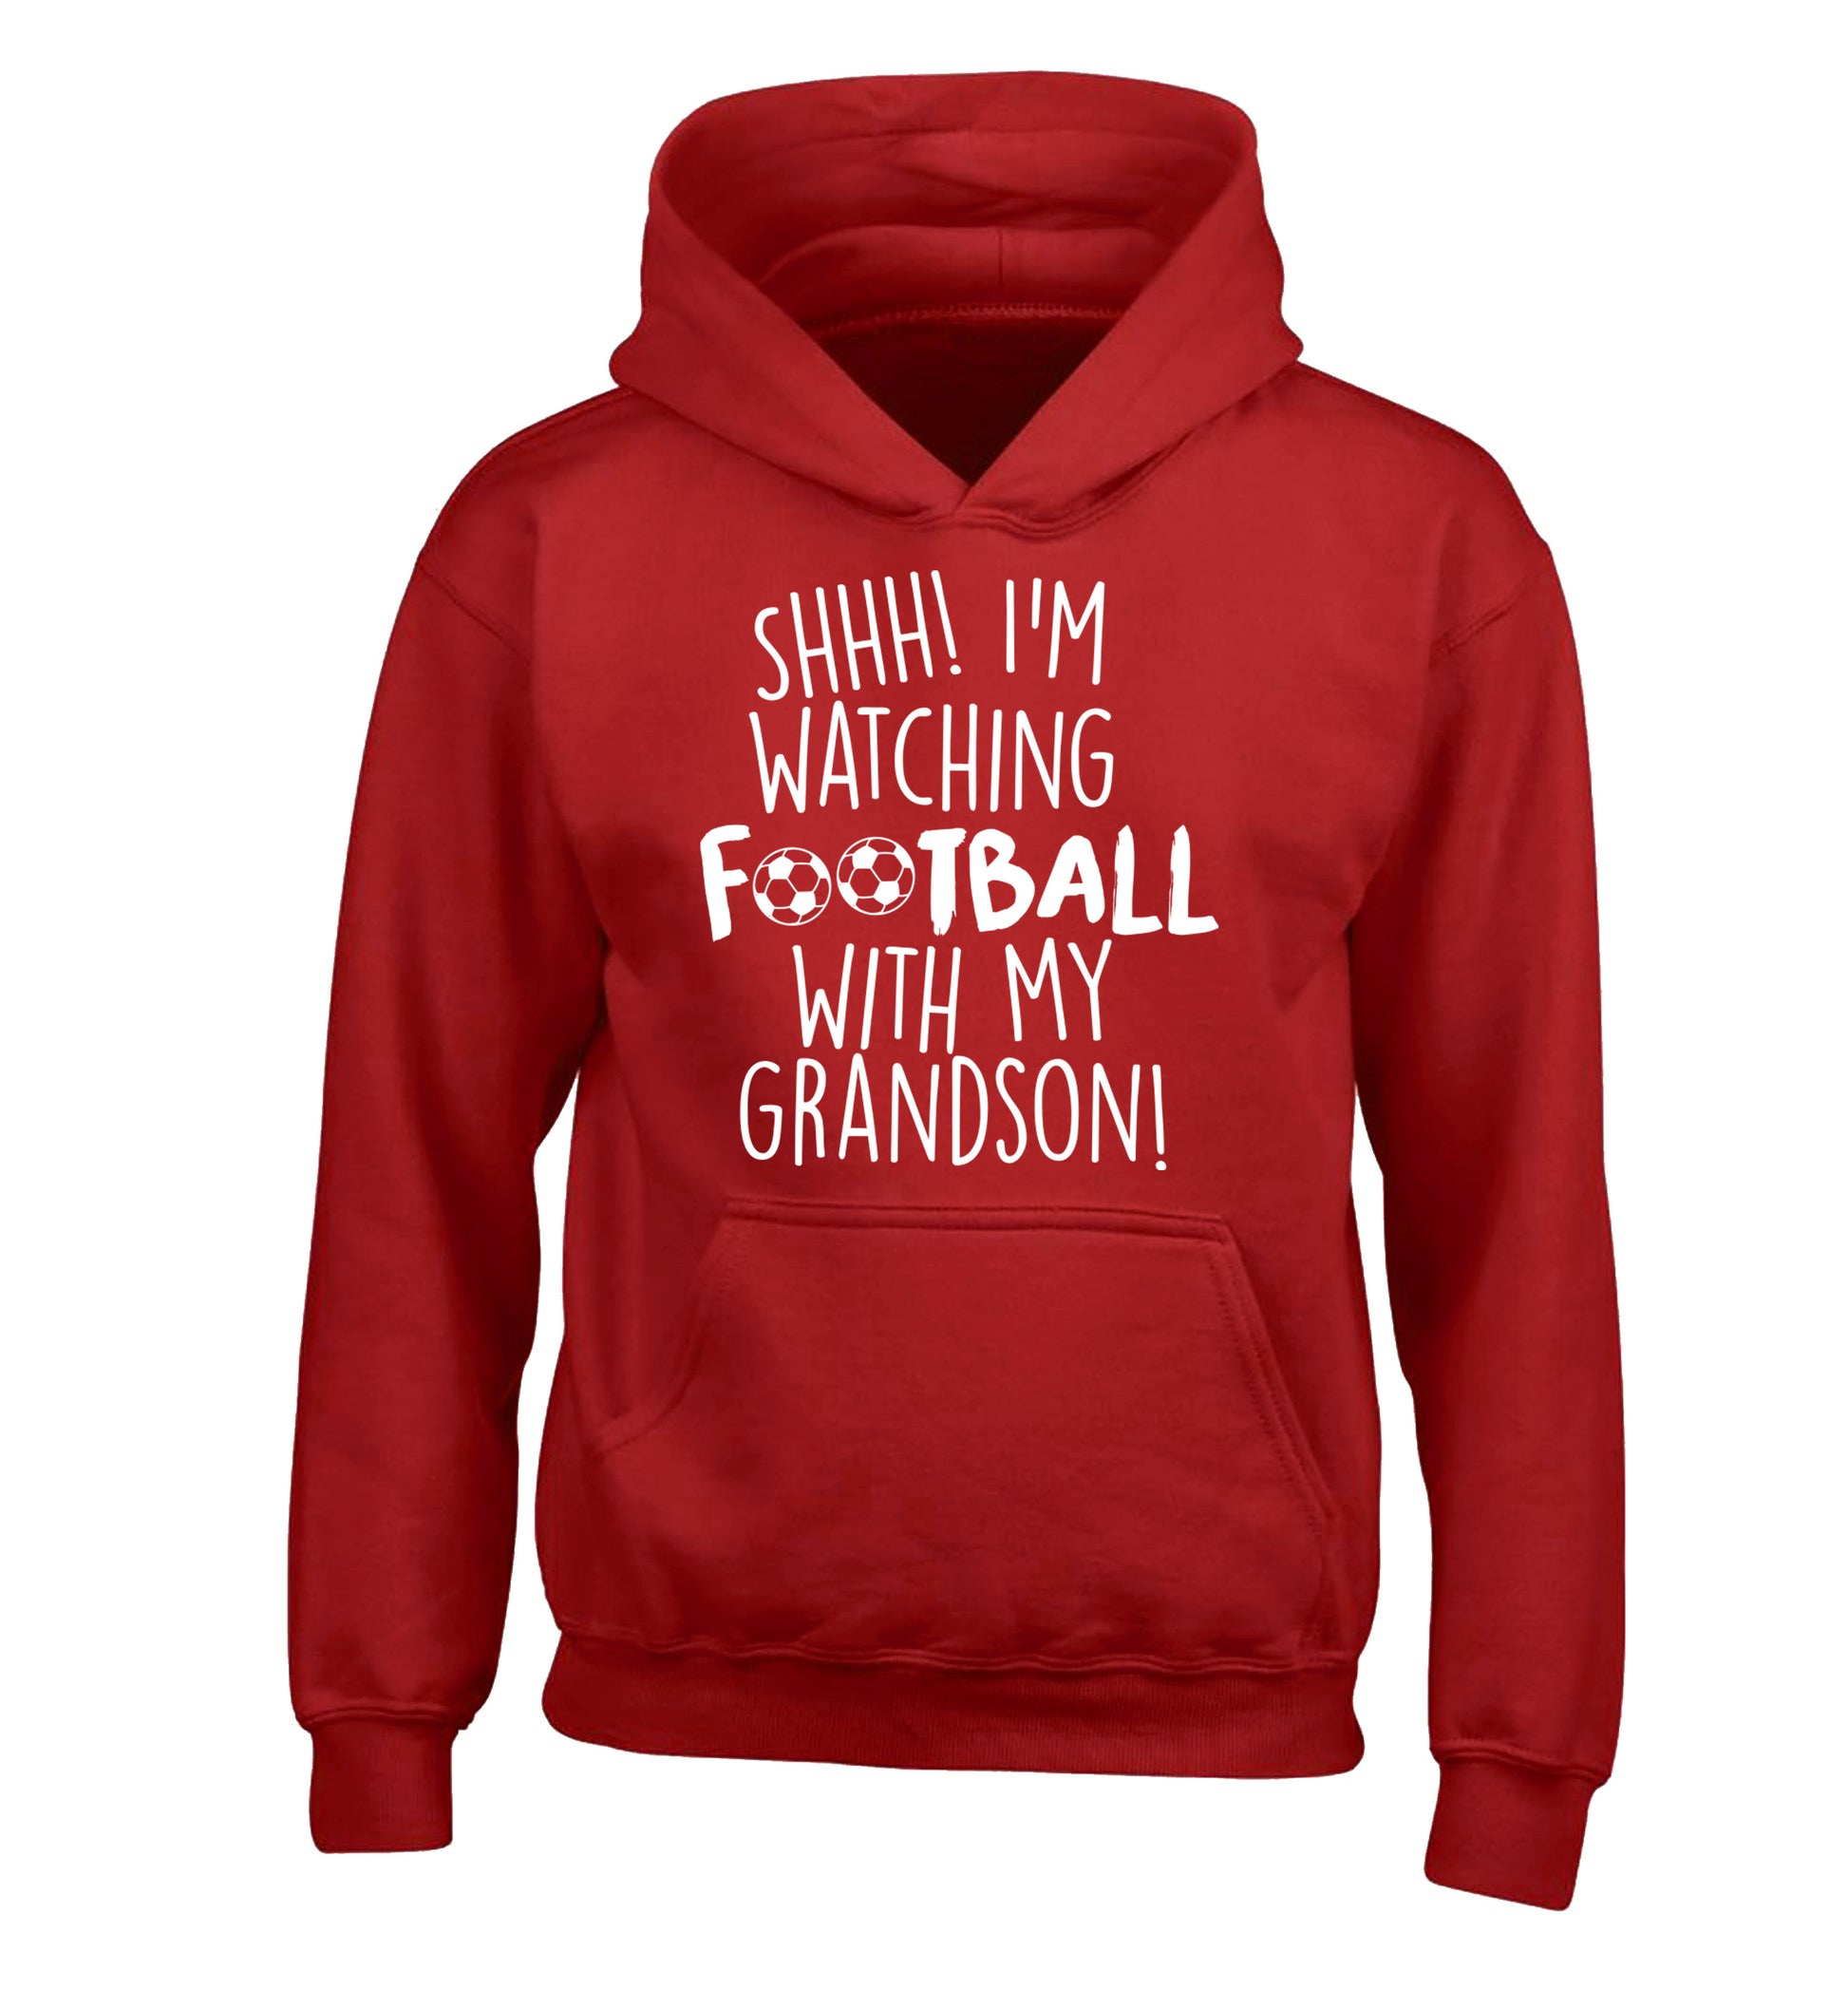 Shhh I'm watching football with my grandson children's red hoodie 12-14 Years